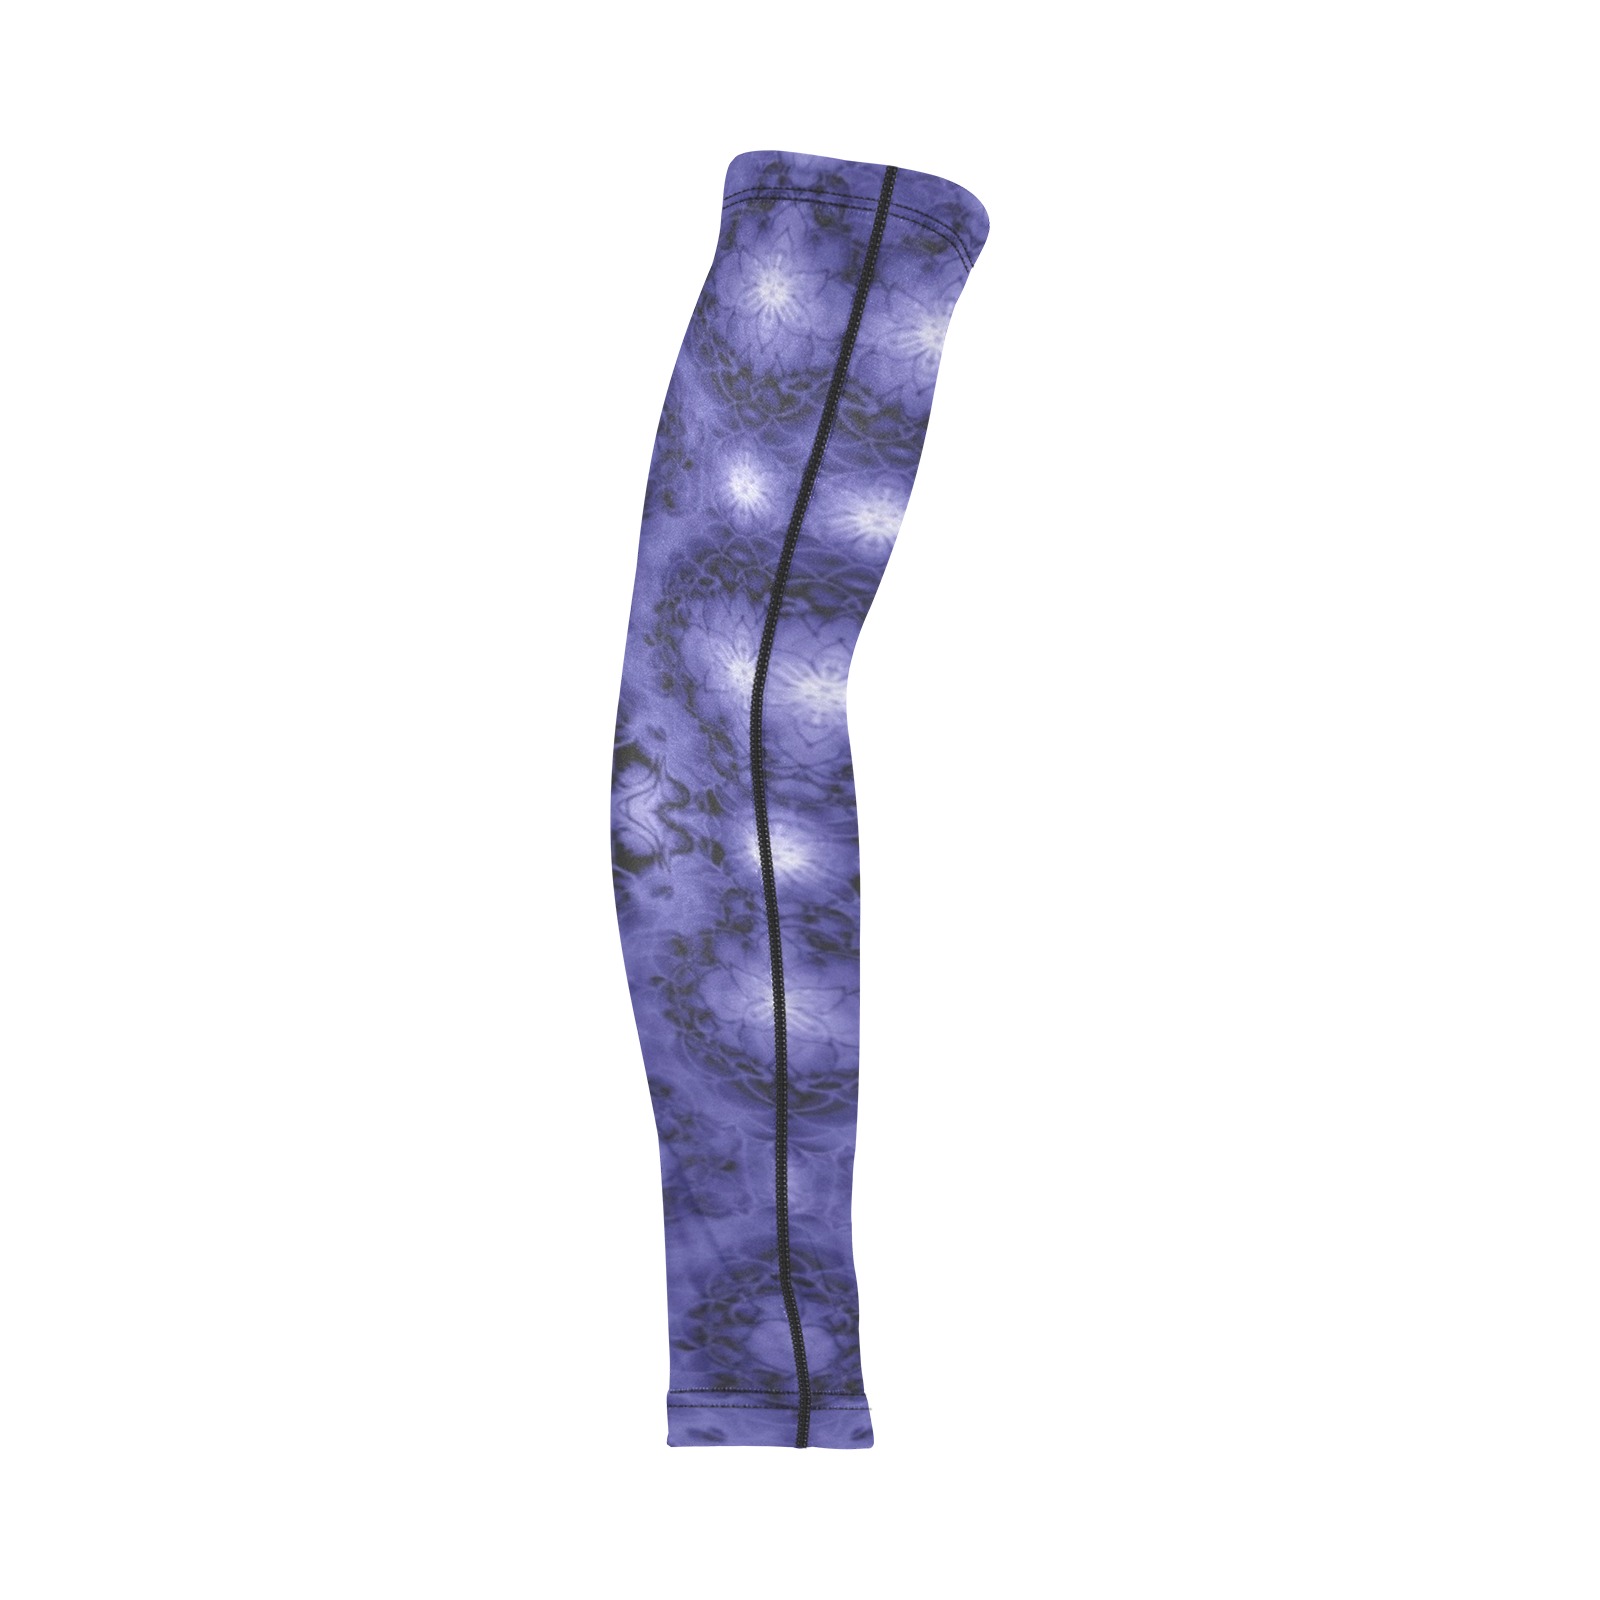 Nidhi decembre 2014-pattern 7-44x55 inches-night neck back Arm Sleeves (Set of Two)